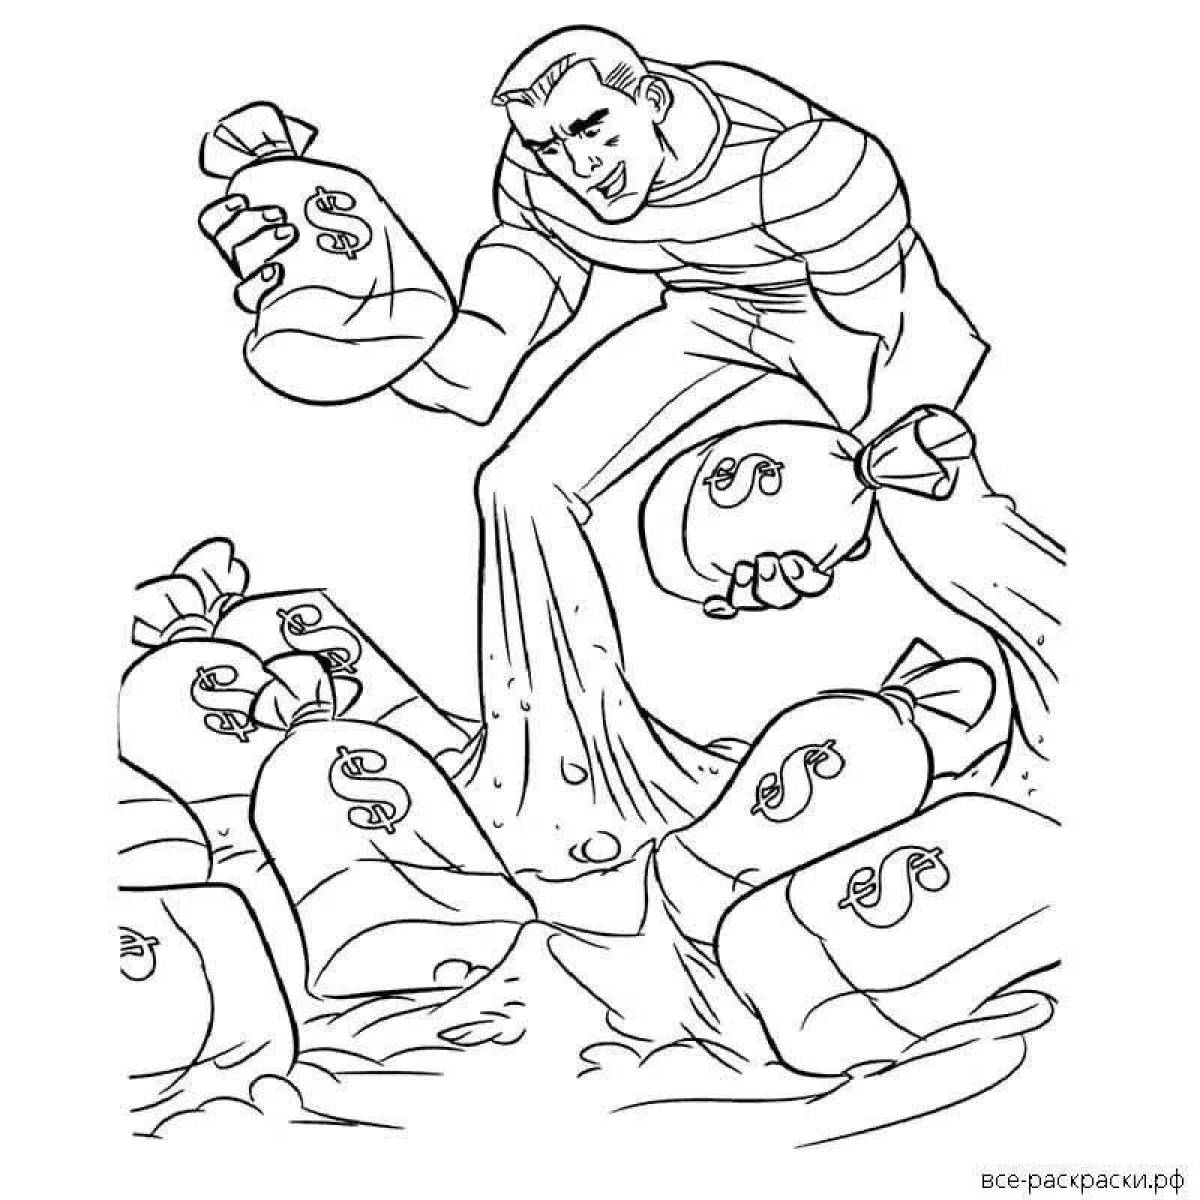 Coloring page of a playful man with sand